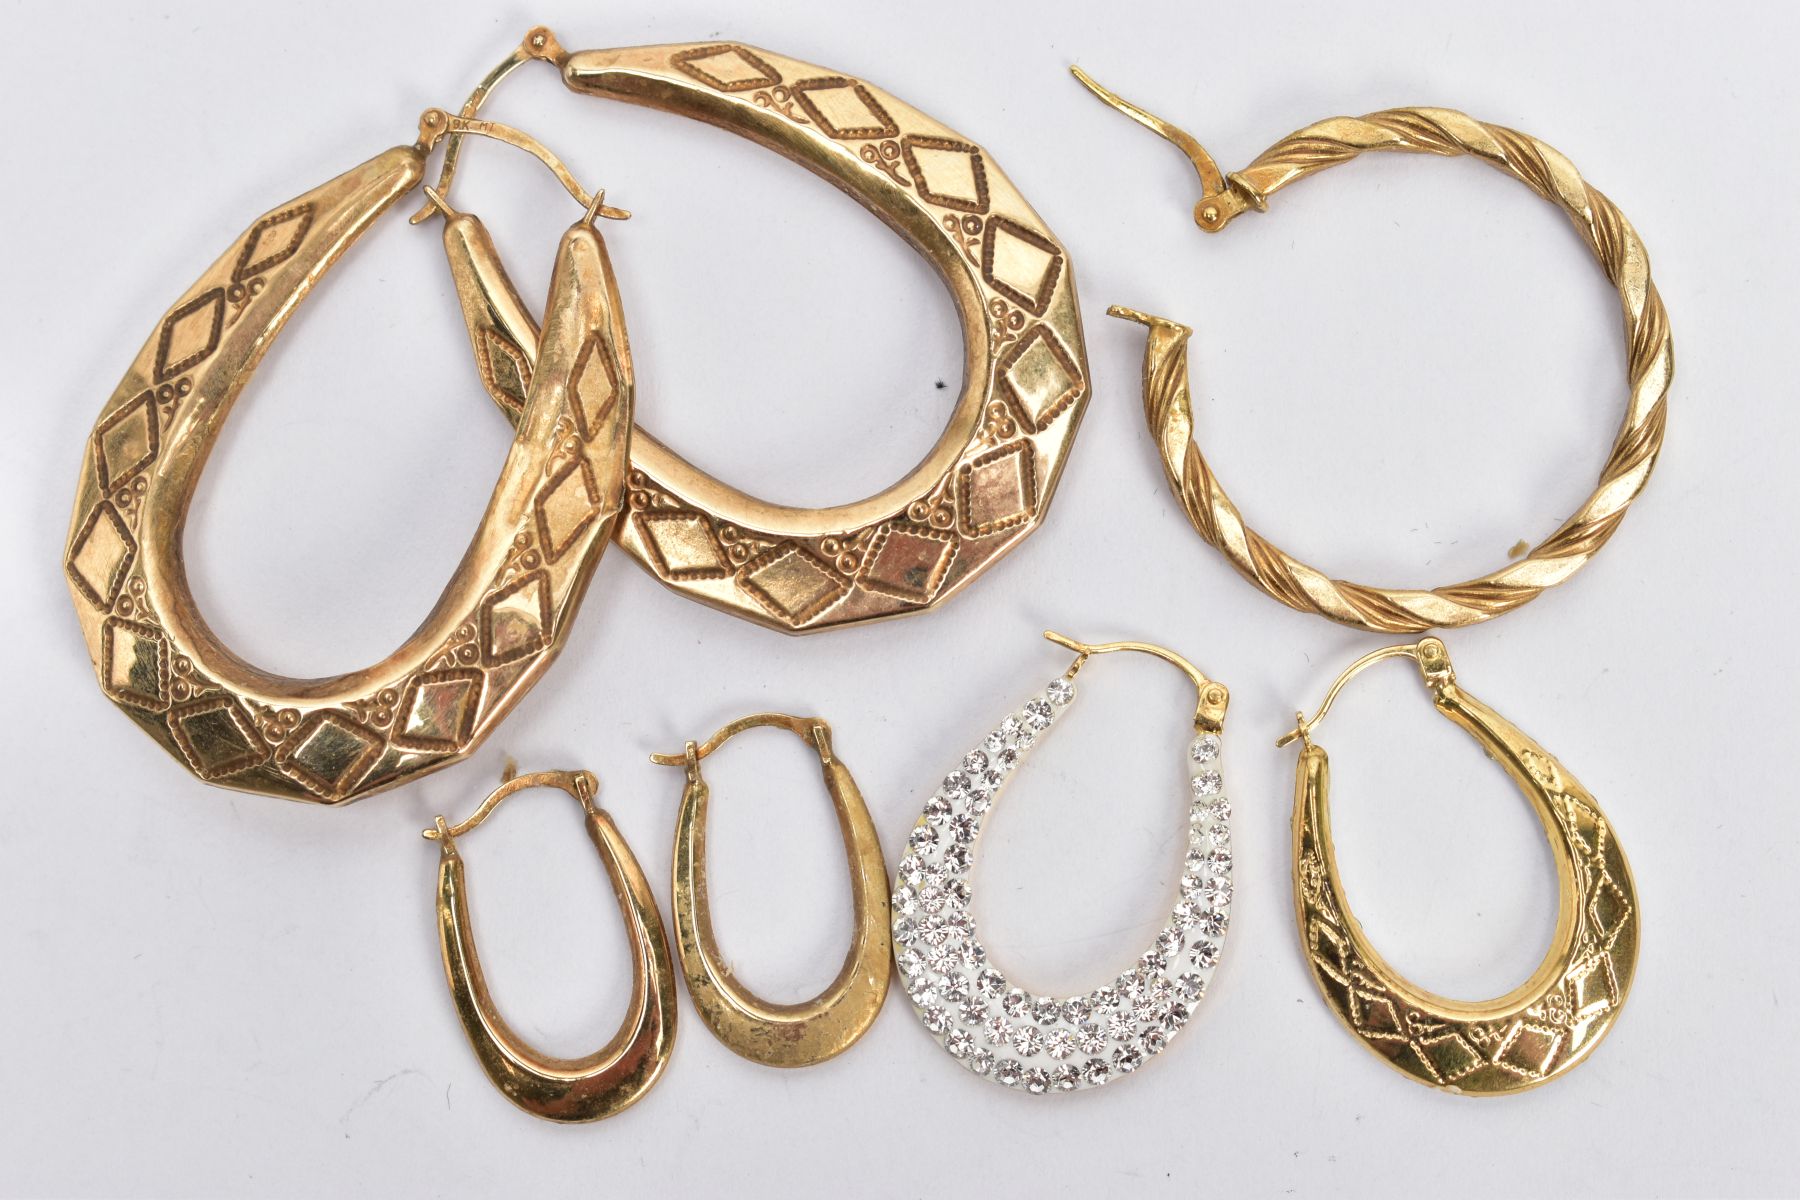 THREE PAIRS OF HOOP EARRINGS AND A SINGLE EARRING, to include a large pair of oval drop hoop